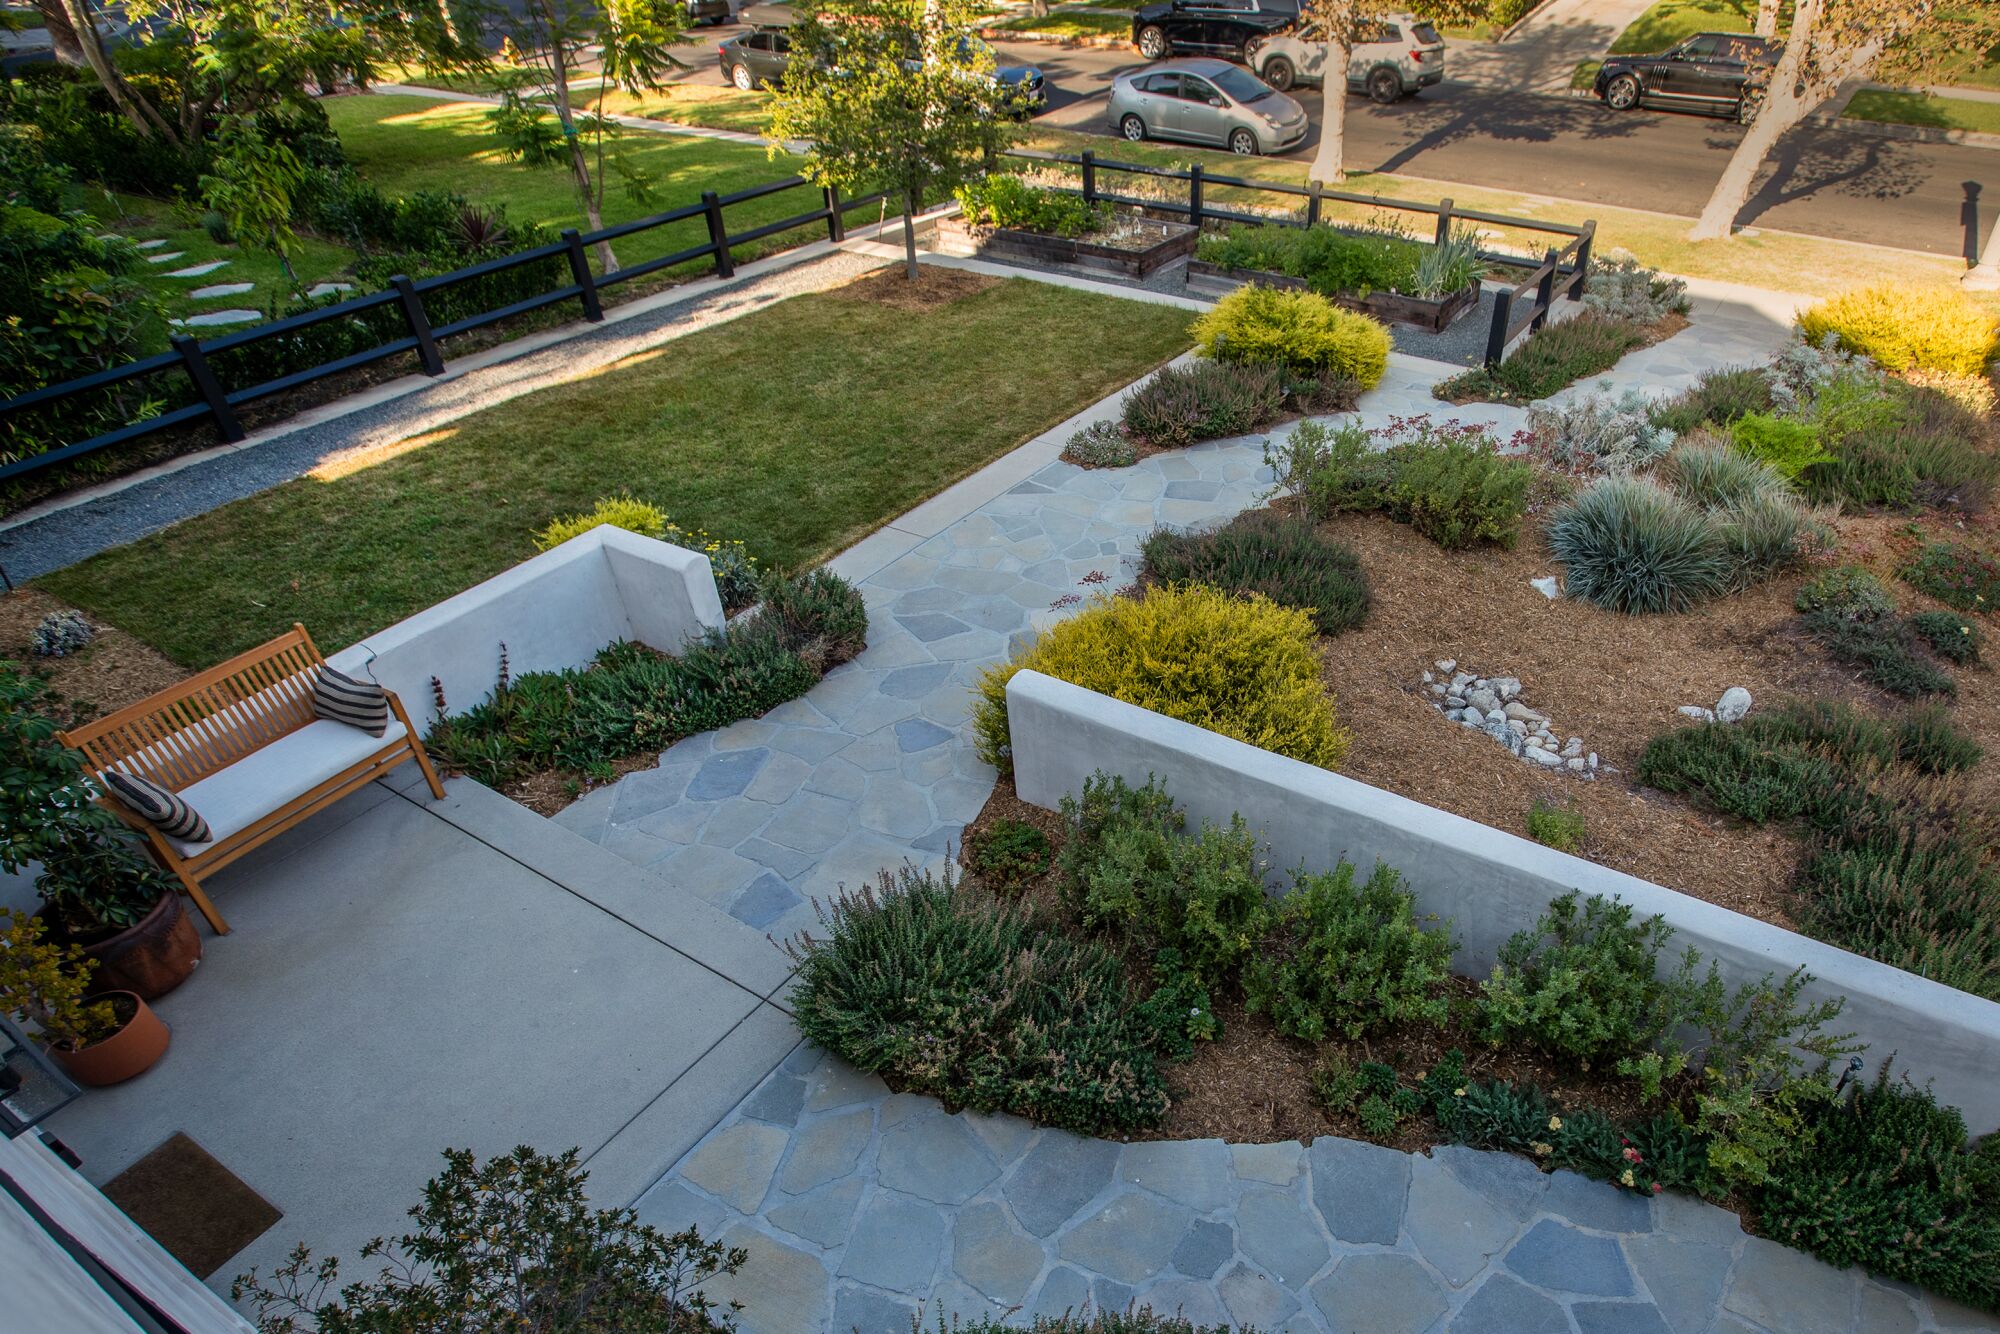 An overhead view of the Matloff's garden and concrete pavers. 